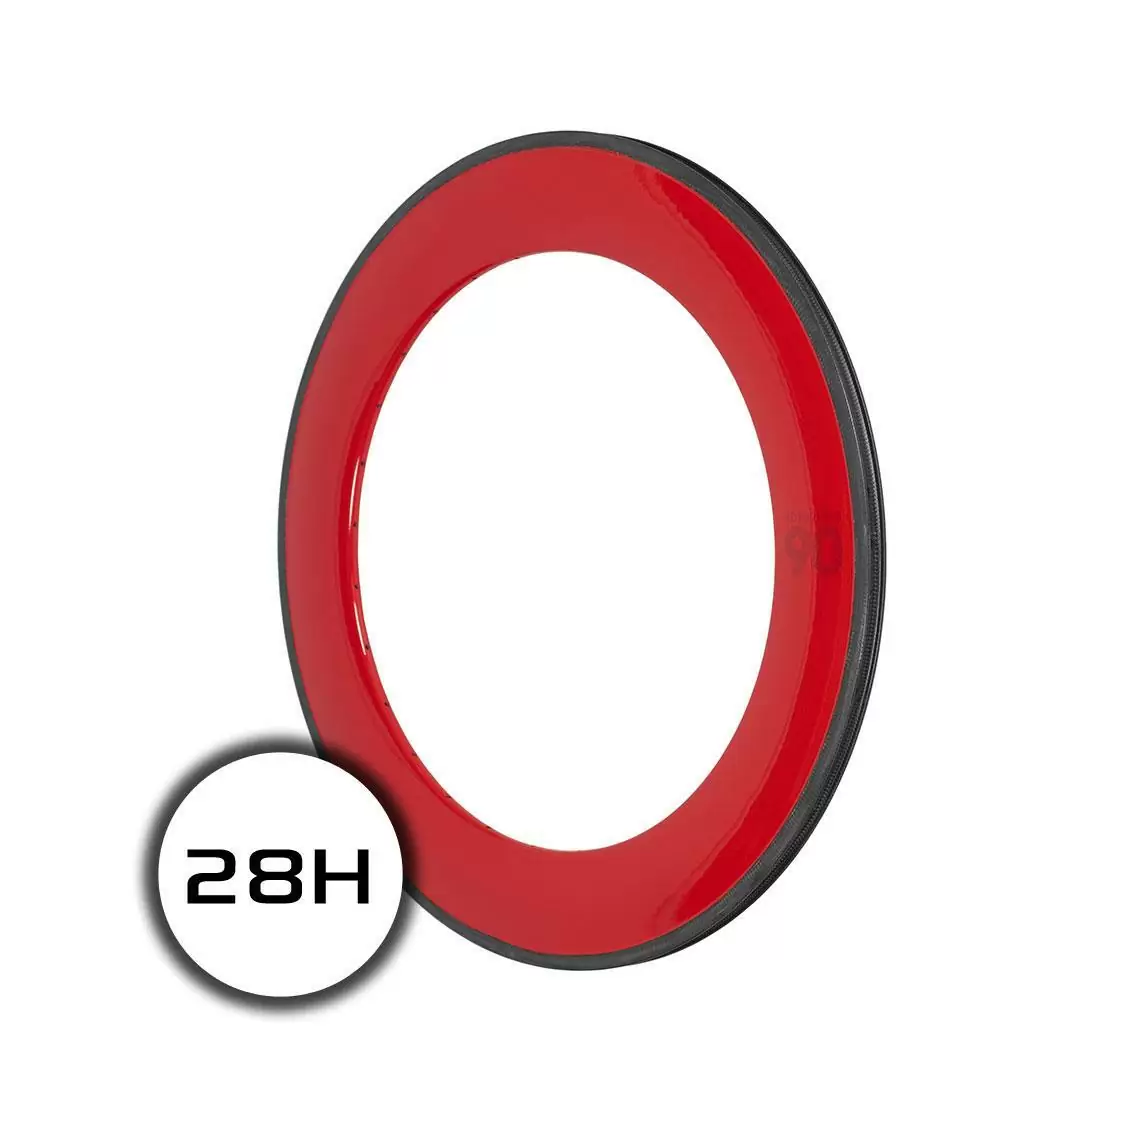 rim notorious 90 700c carbon 28h msw red - image